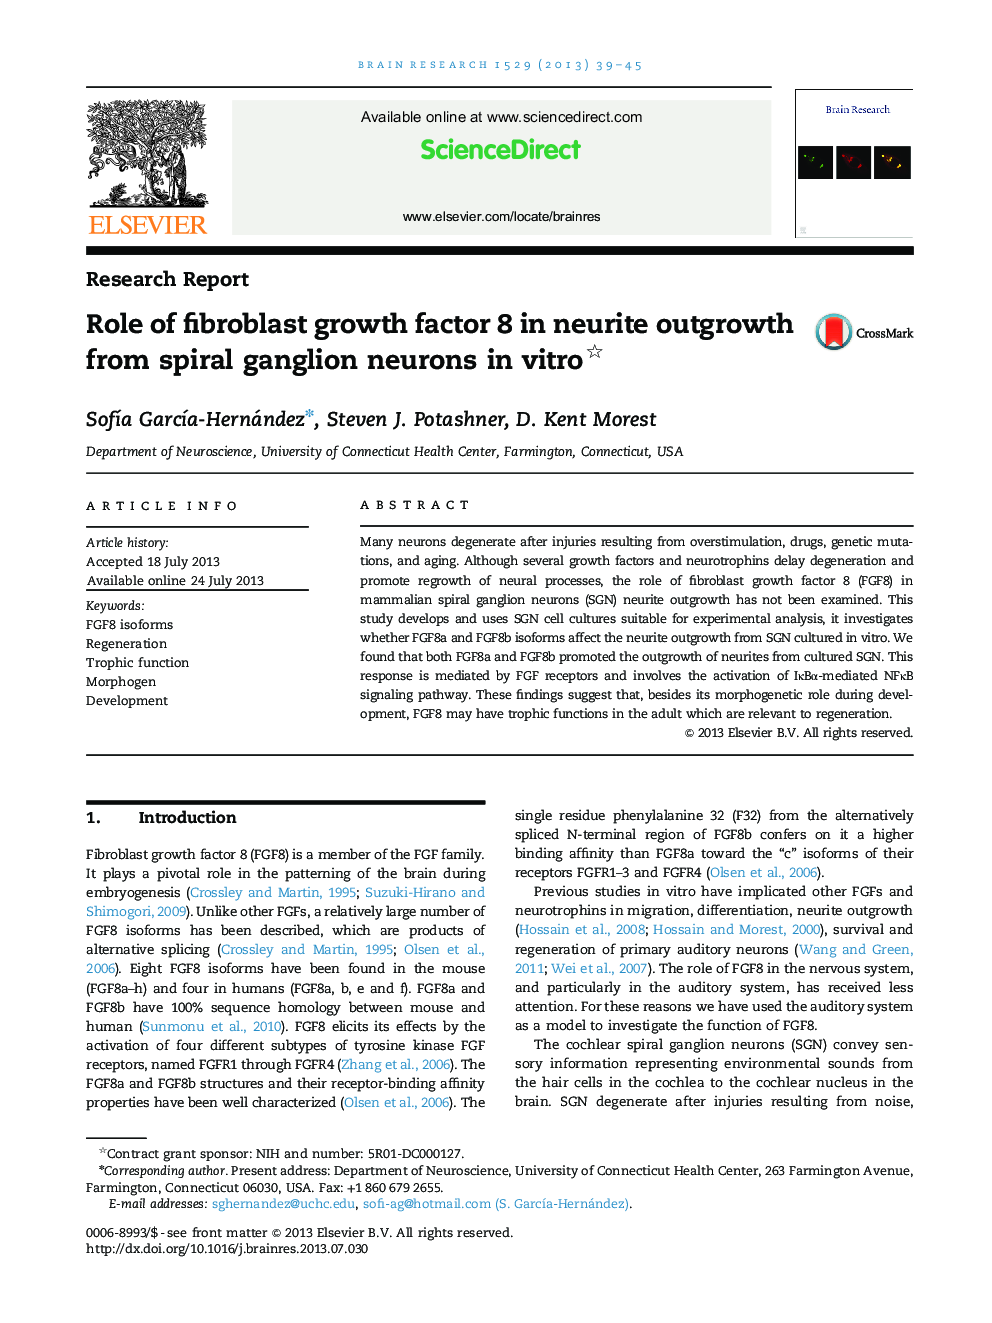 Research ReportRole of fibroblast growth factor 8 in neurite outgrowth from spiral ganglion neurons in vitro